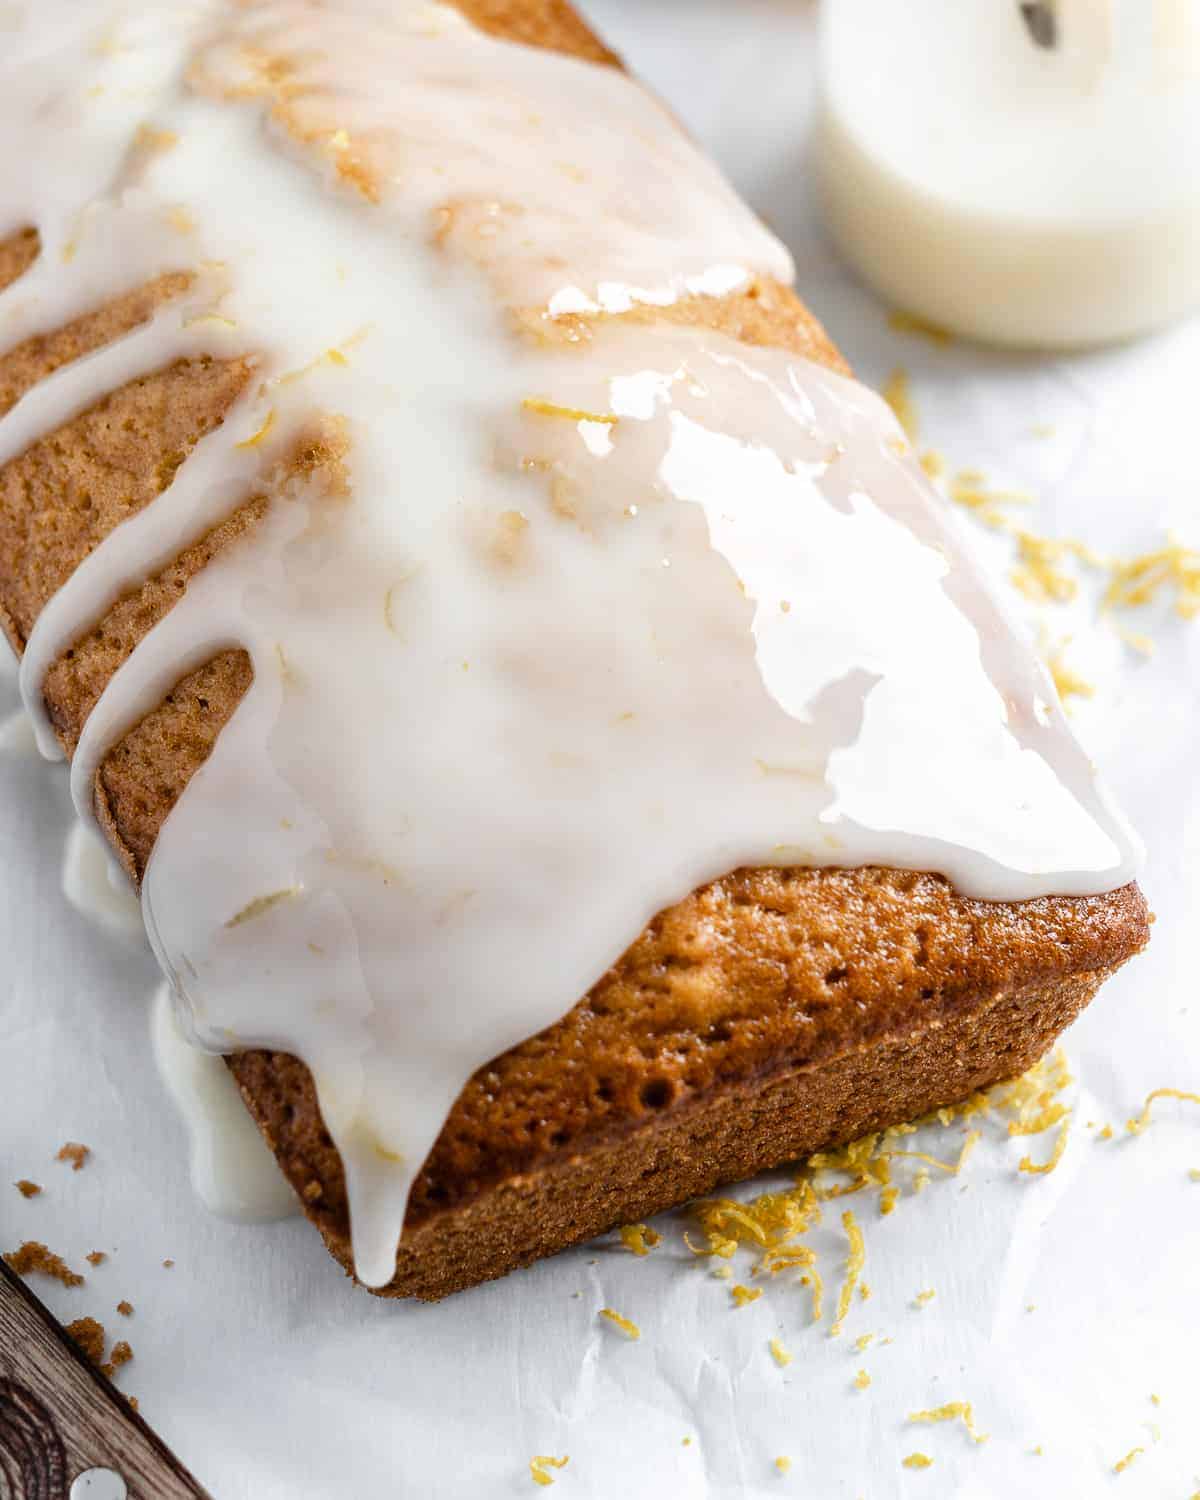 completed lemon loaf against a white background